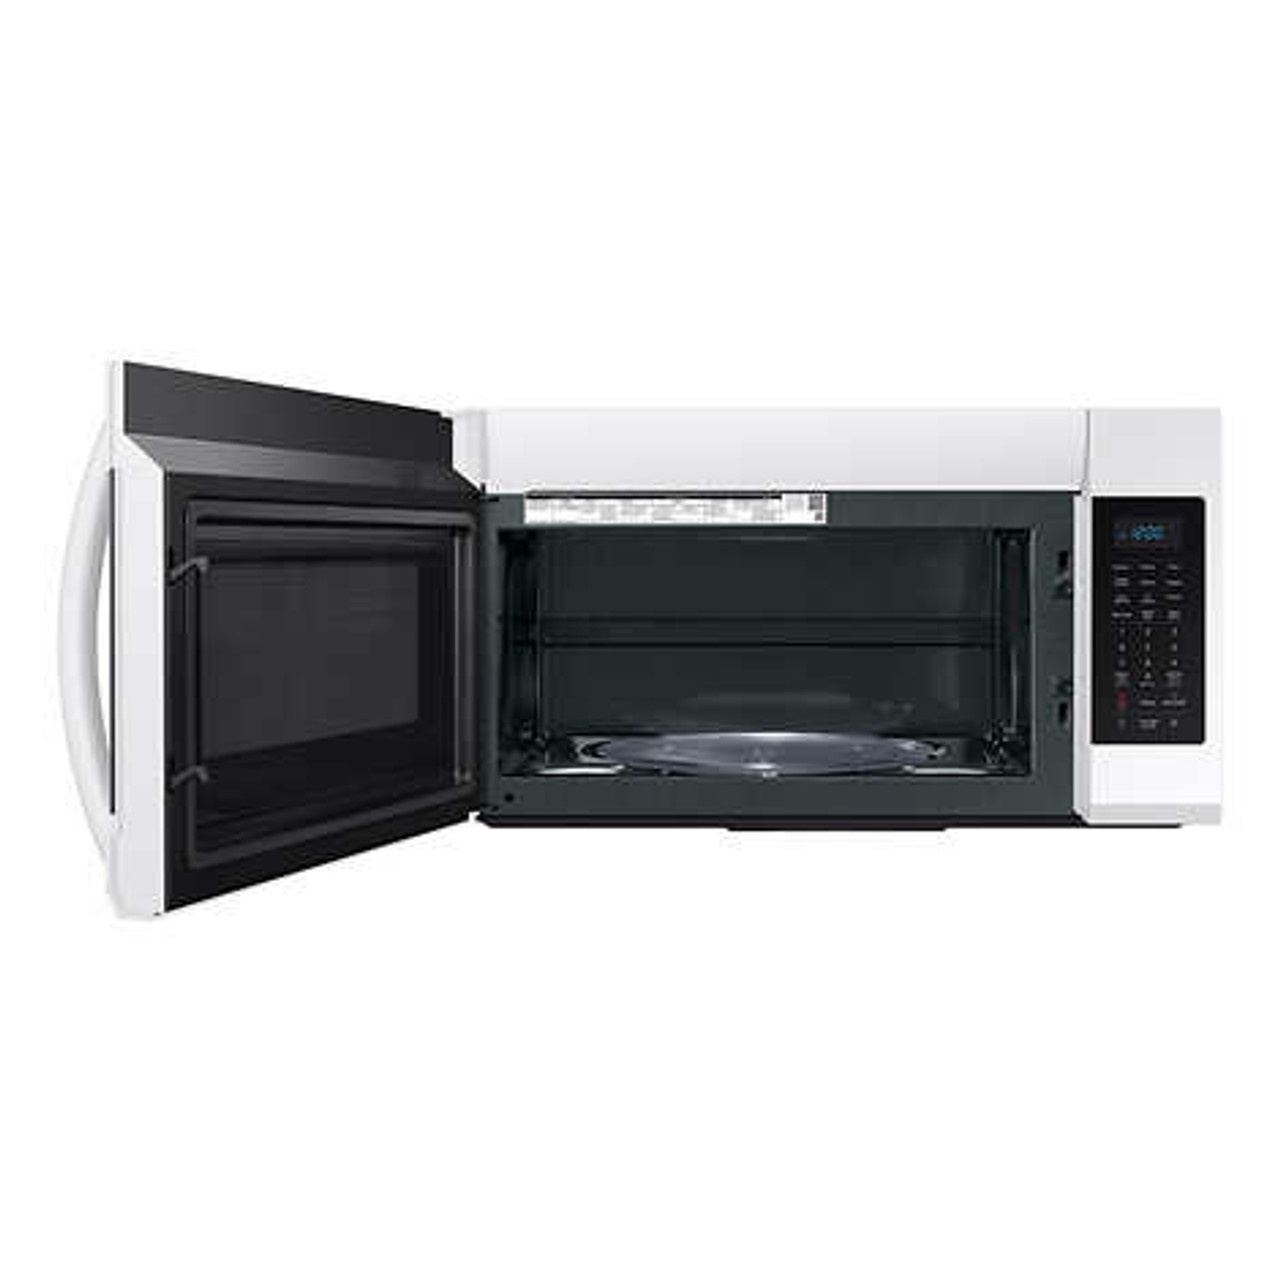 Samsung 1.9 cu. ft. White Over-the-Range Microwave - Compact Efficiency with Clean Aesthetics- Chicken Pieces